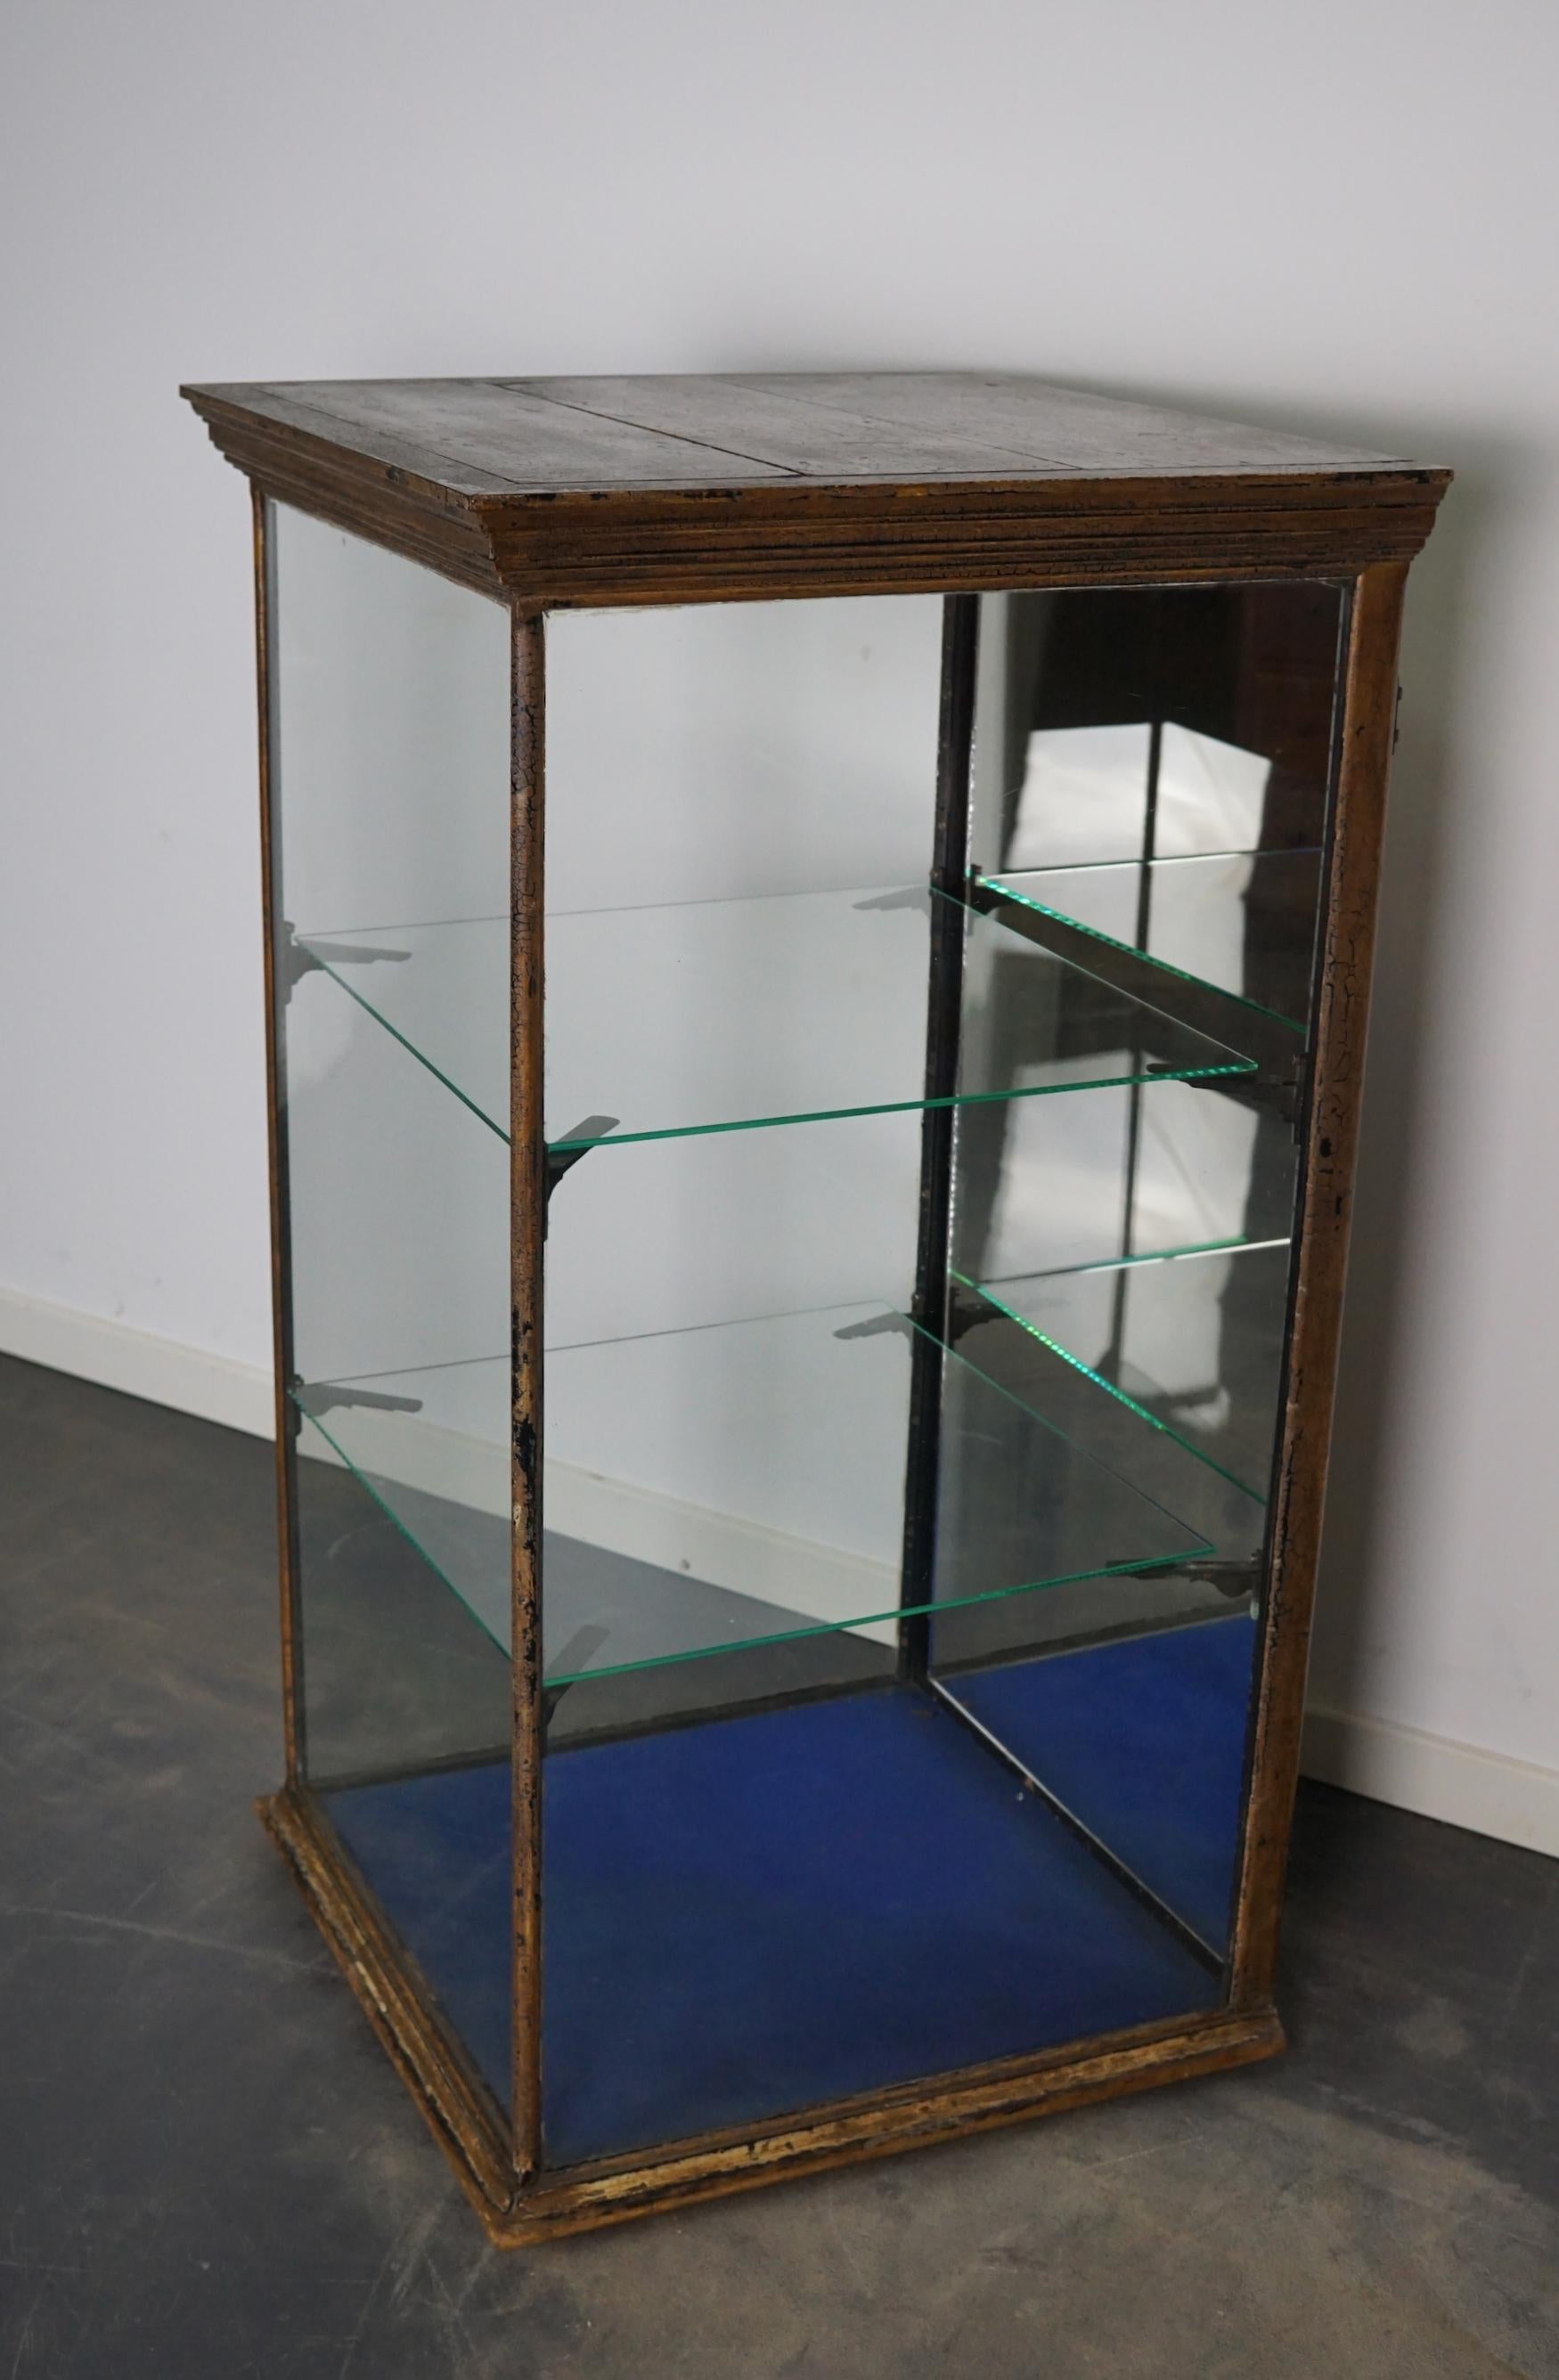 Victorian Painted Mahogany Shop Display Cabinet / Vitrine, Late 19th Century In Good Condition For Sale In Nijmegen, NL